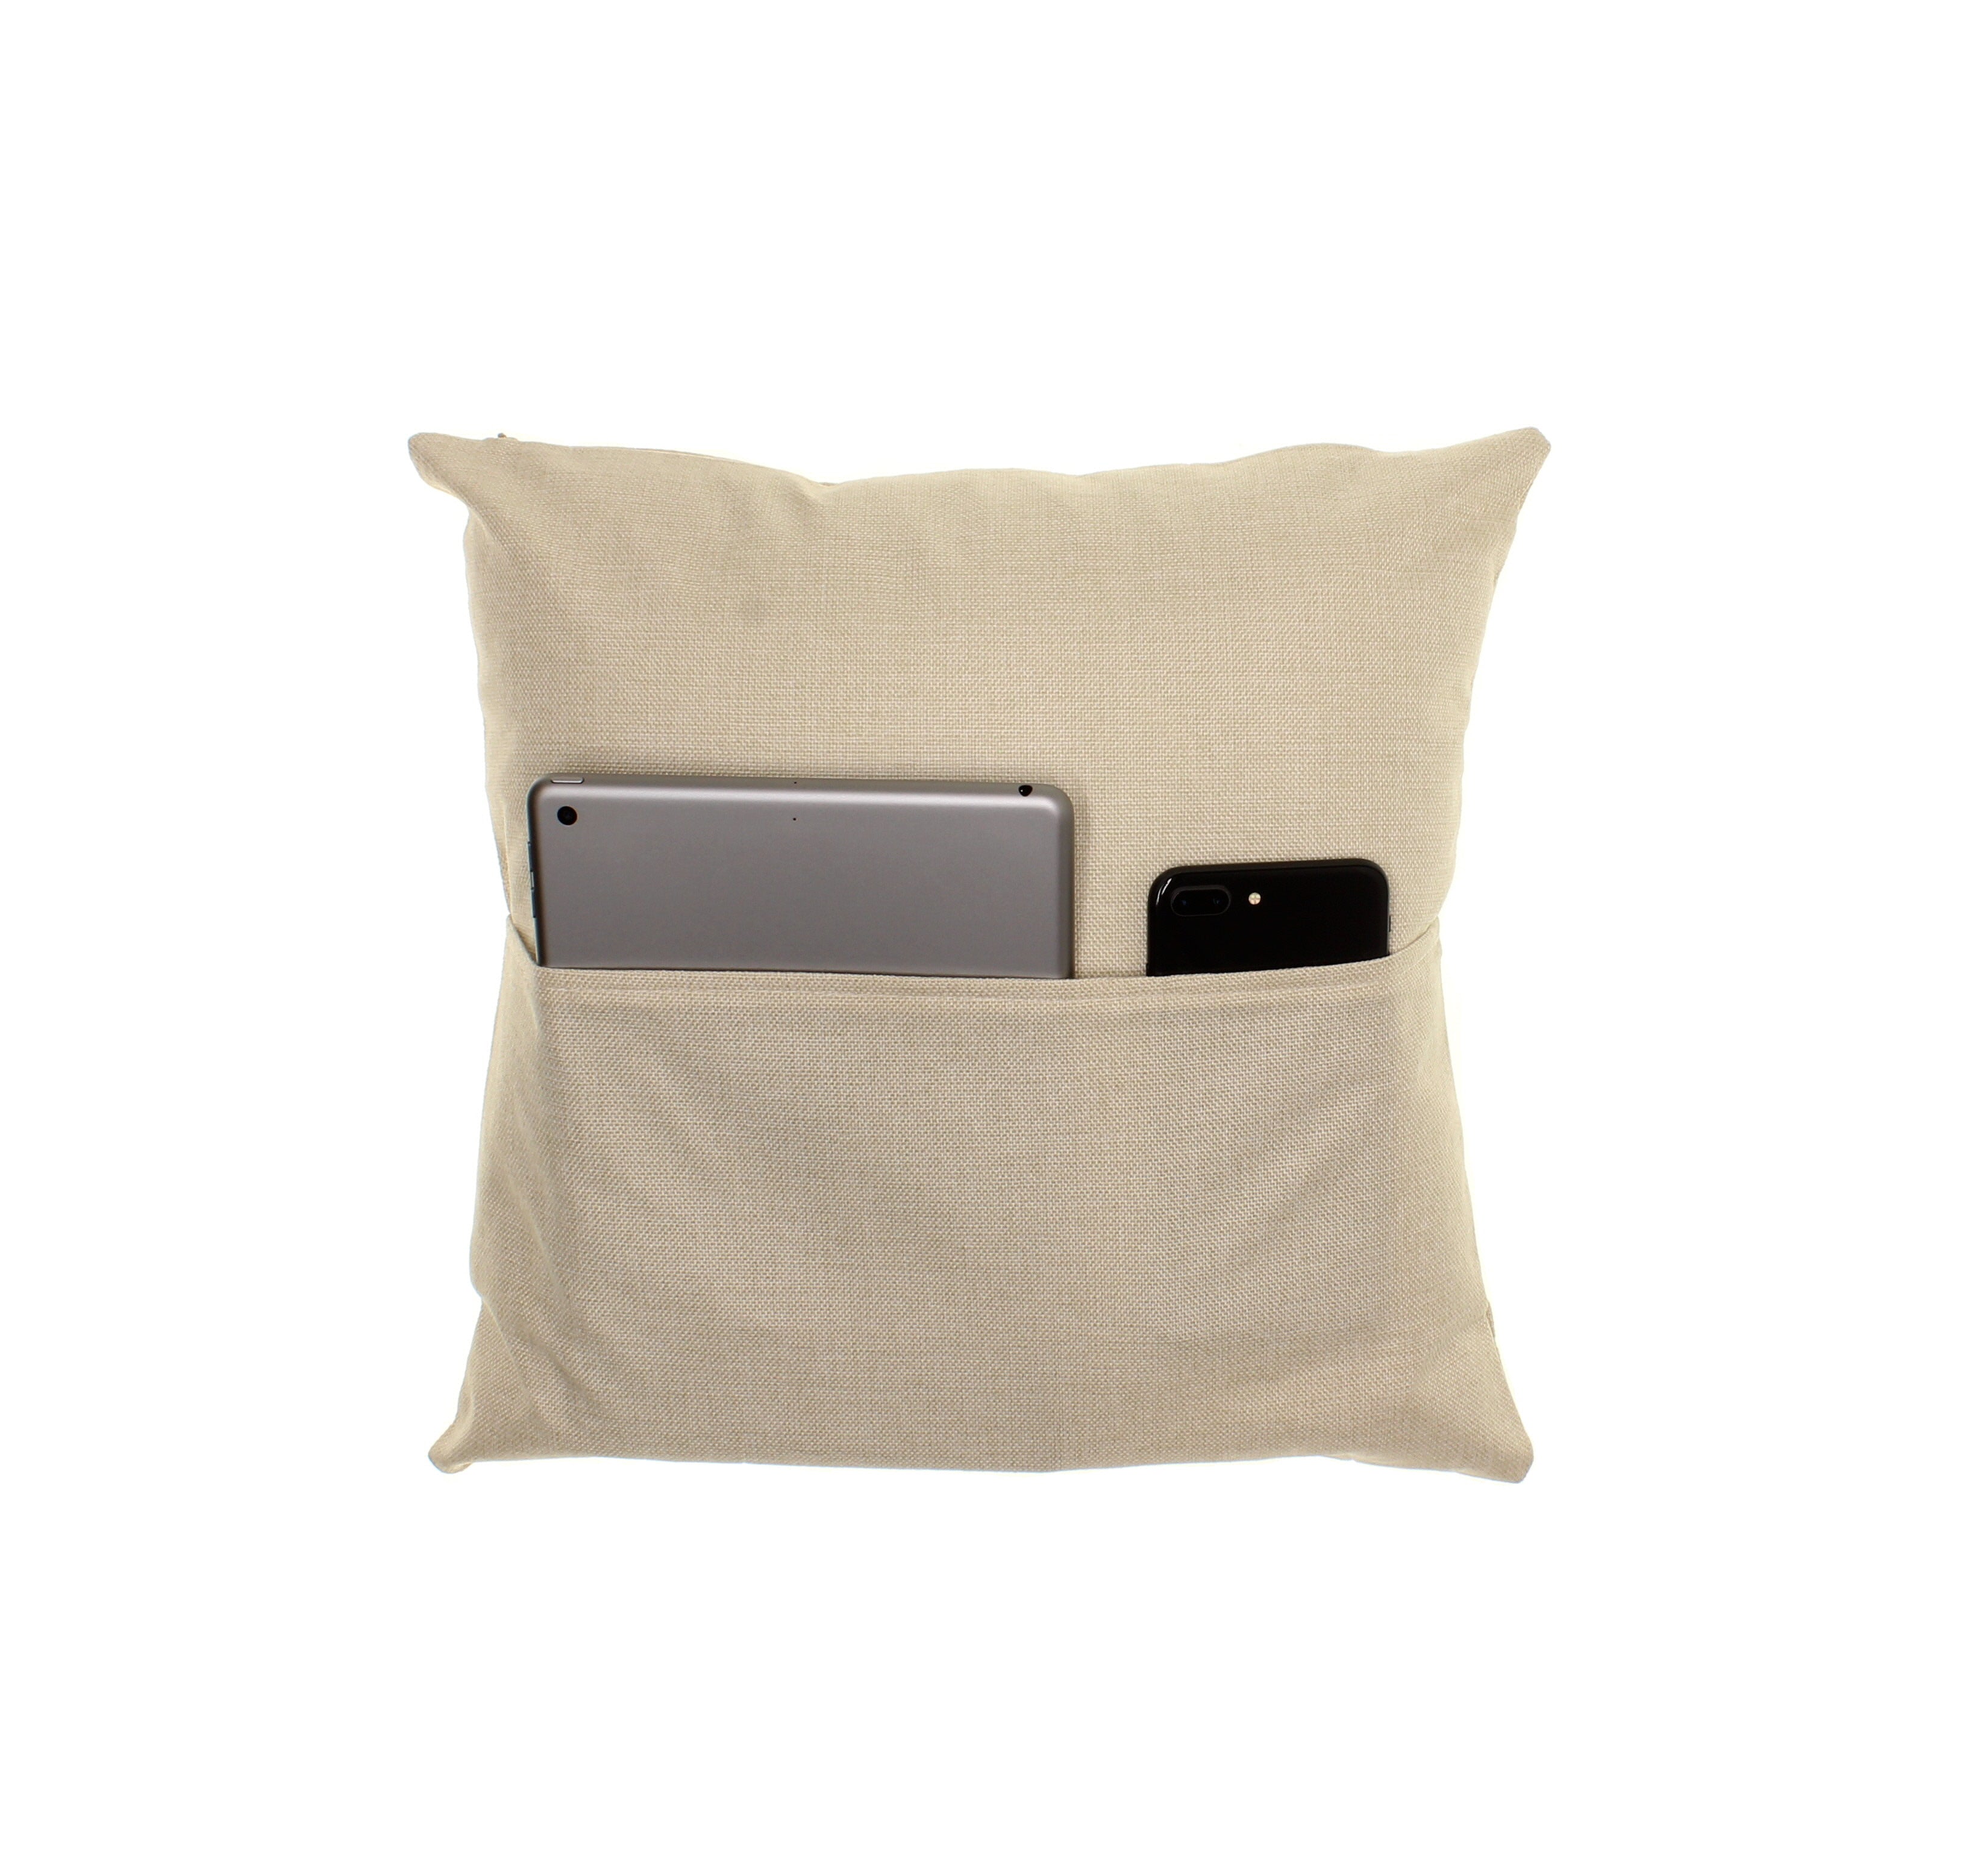 TodoBlanks Pillow Covers with Pocket - 5 pack